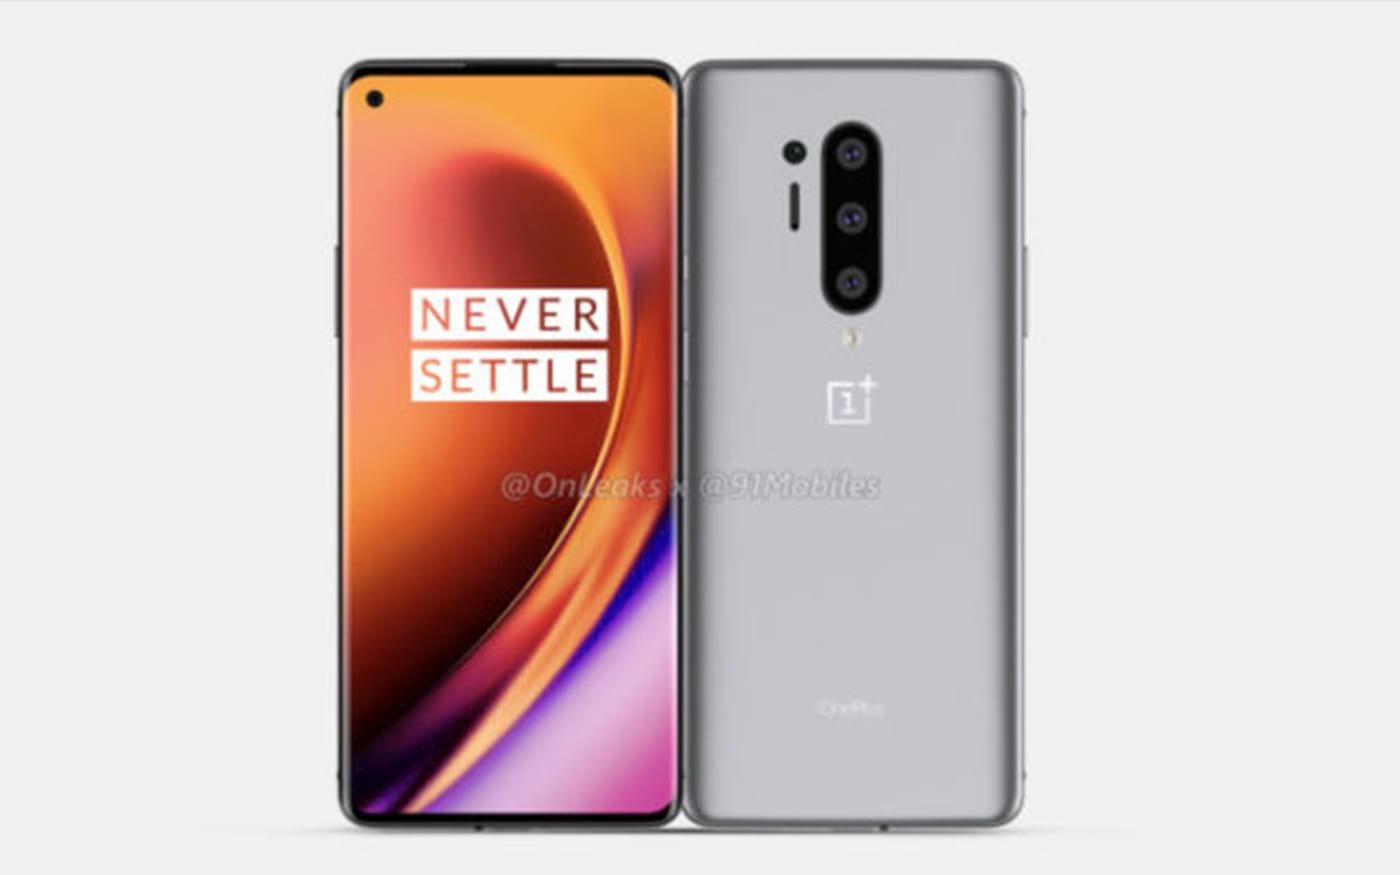 OnePlus 8 and 8 Pro are listed on the Amazon website